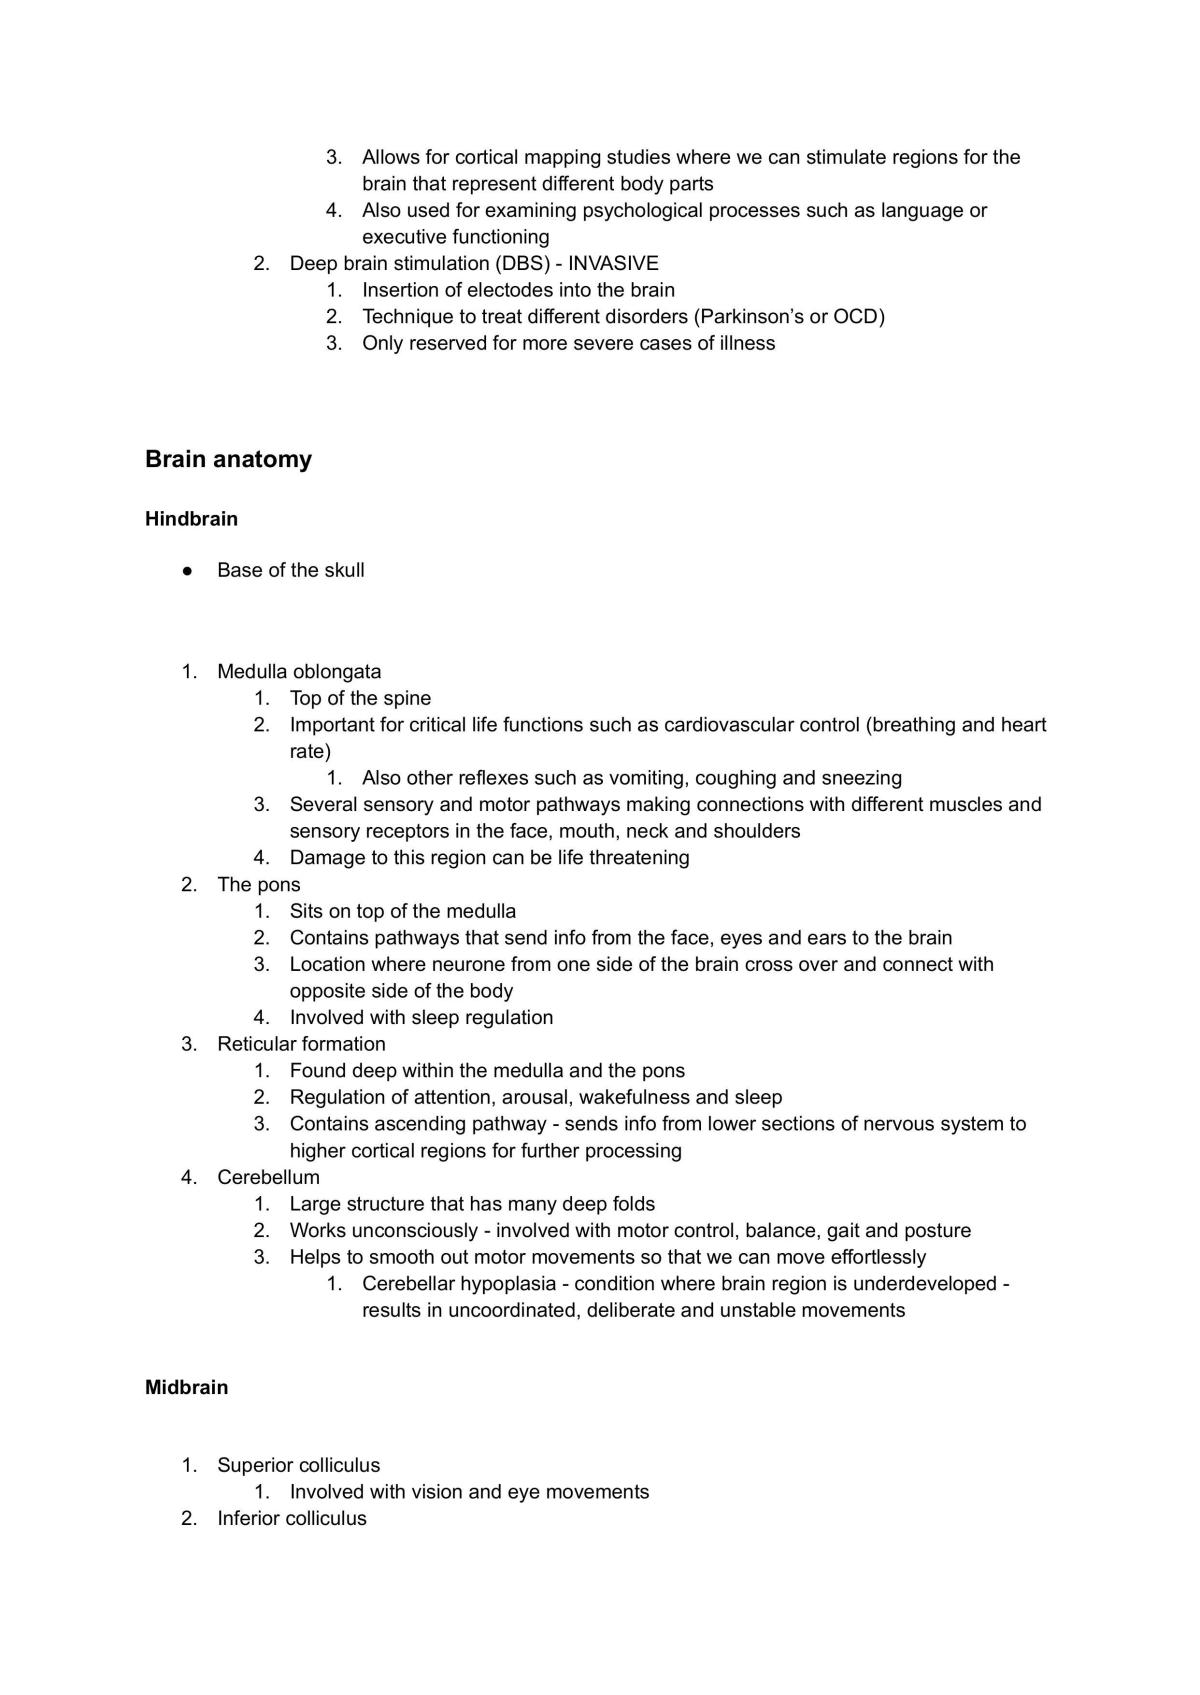 HPS111 Module 2 Complete Notes  - Page 3